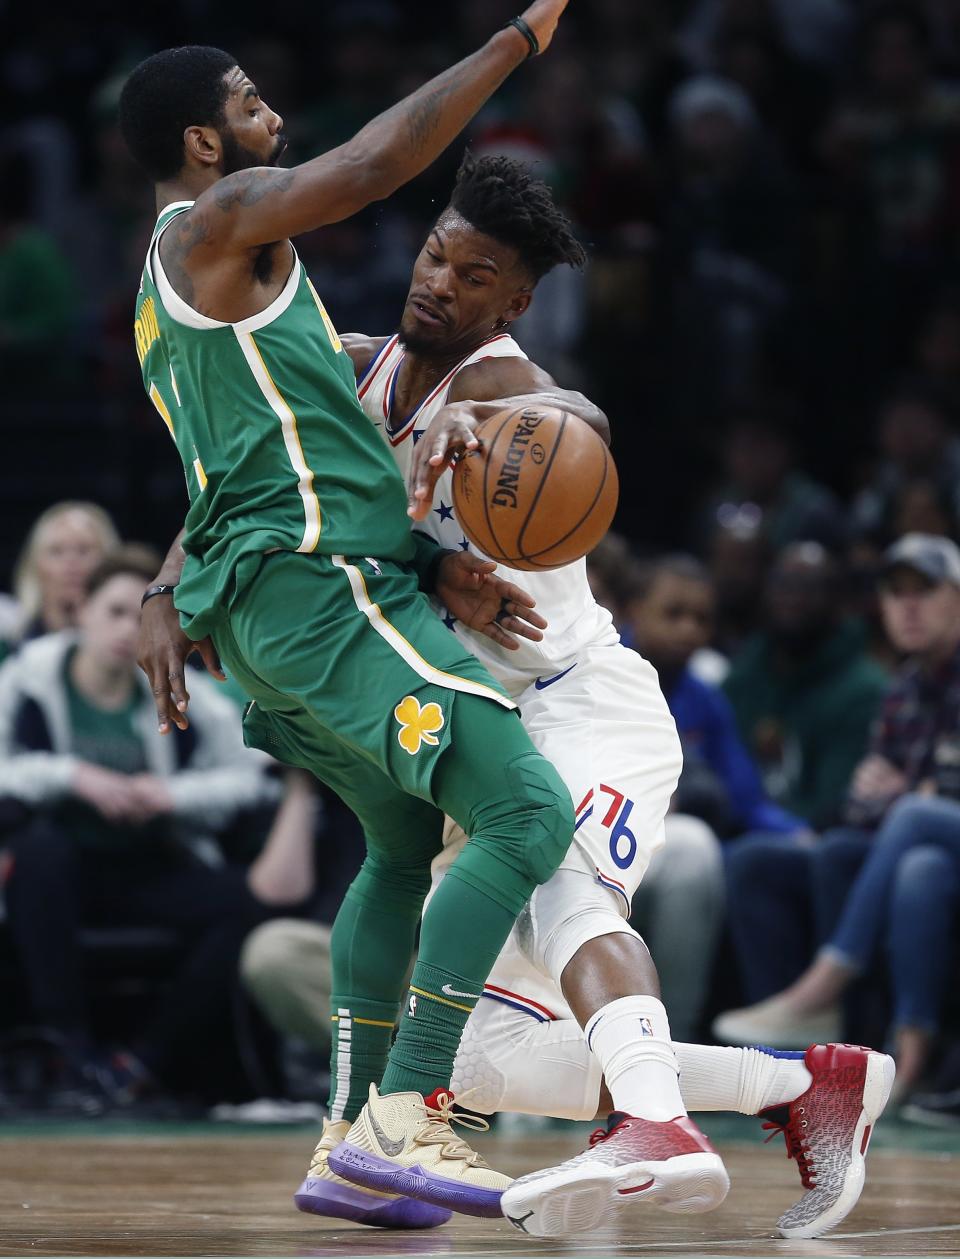 Philadelphia 76ers' Jimmy Butler, right, fouls Boston Celtics' Kyrie Irving during the first half of an NBA basketball game in Boston, Tuesday, Dec. 25, 2018. (AP Photo/Michael Dwyer)